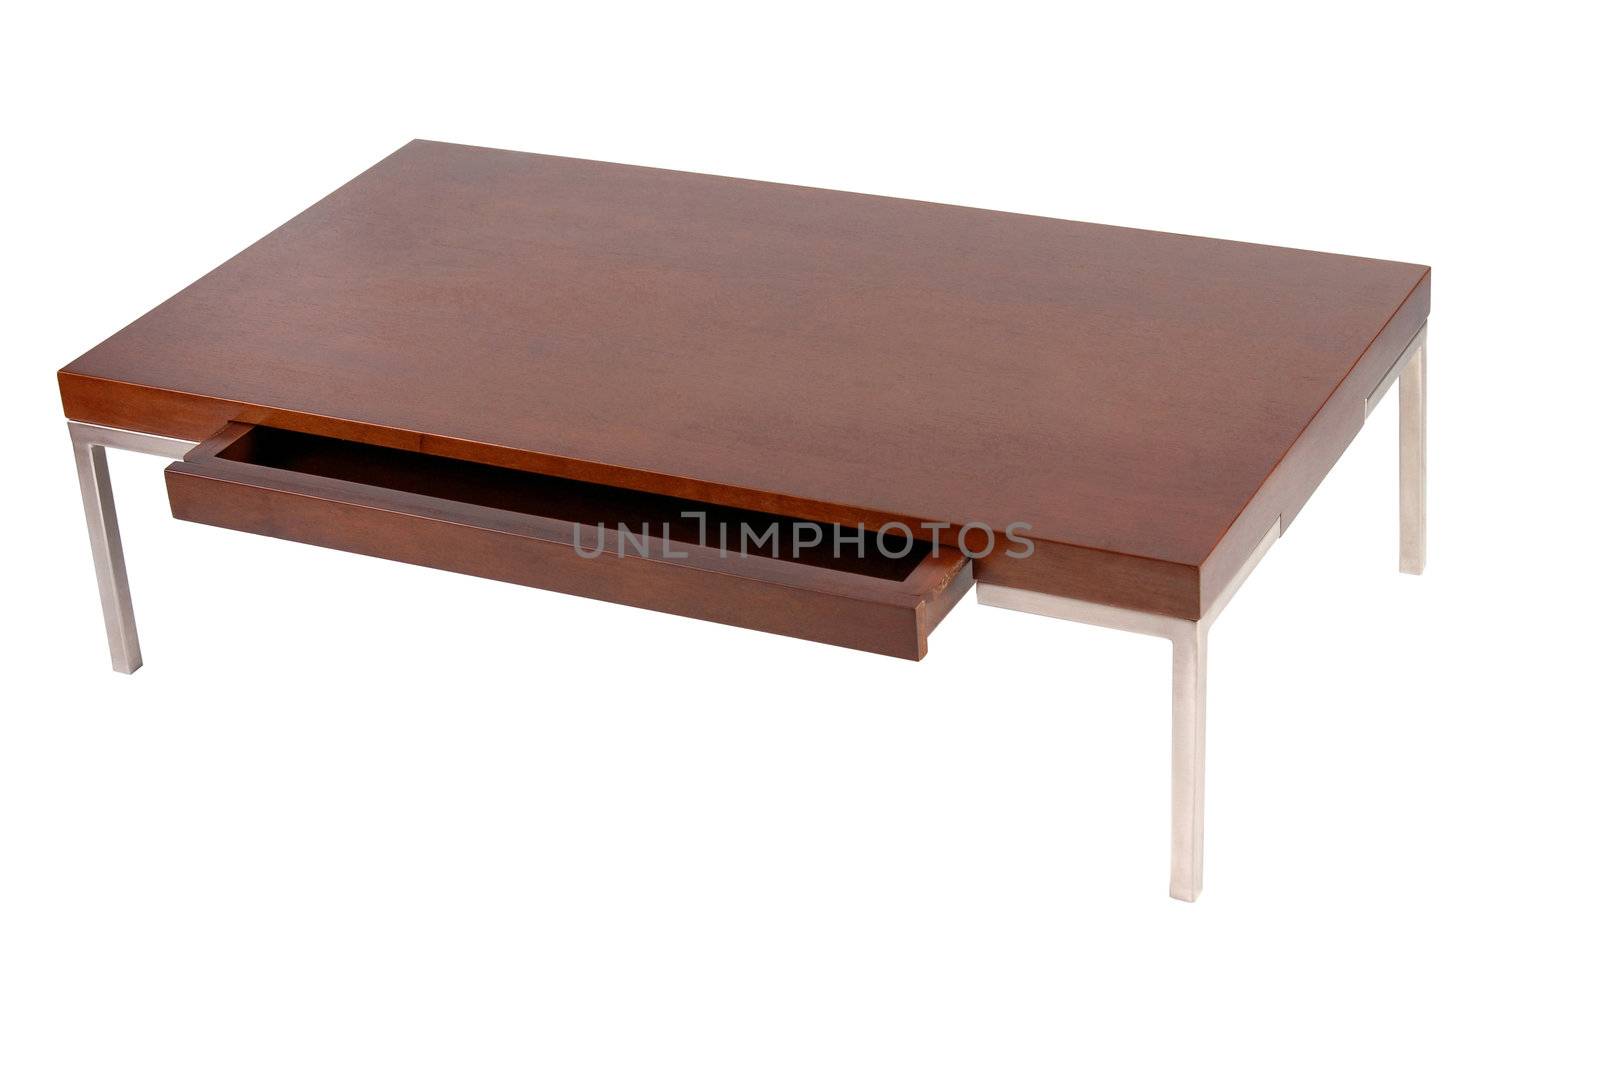 Wooden and metal coffee table with an open drawer. Isolated on white background